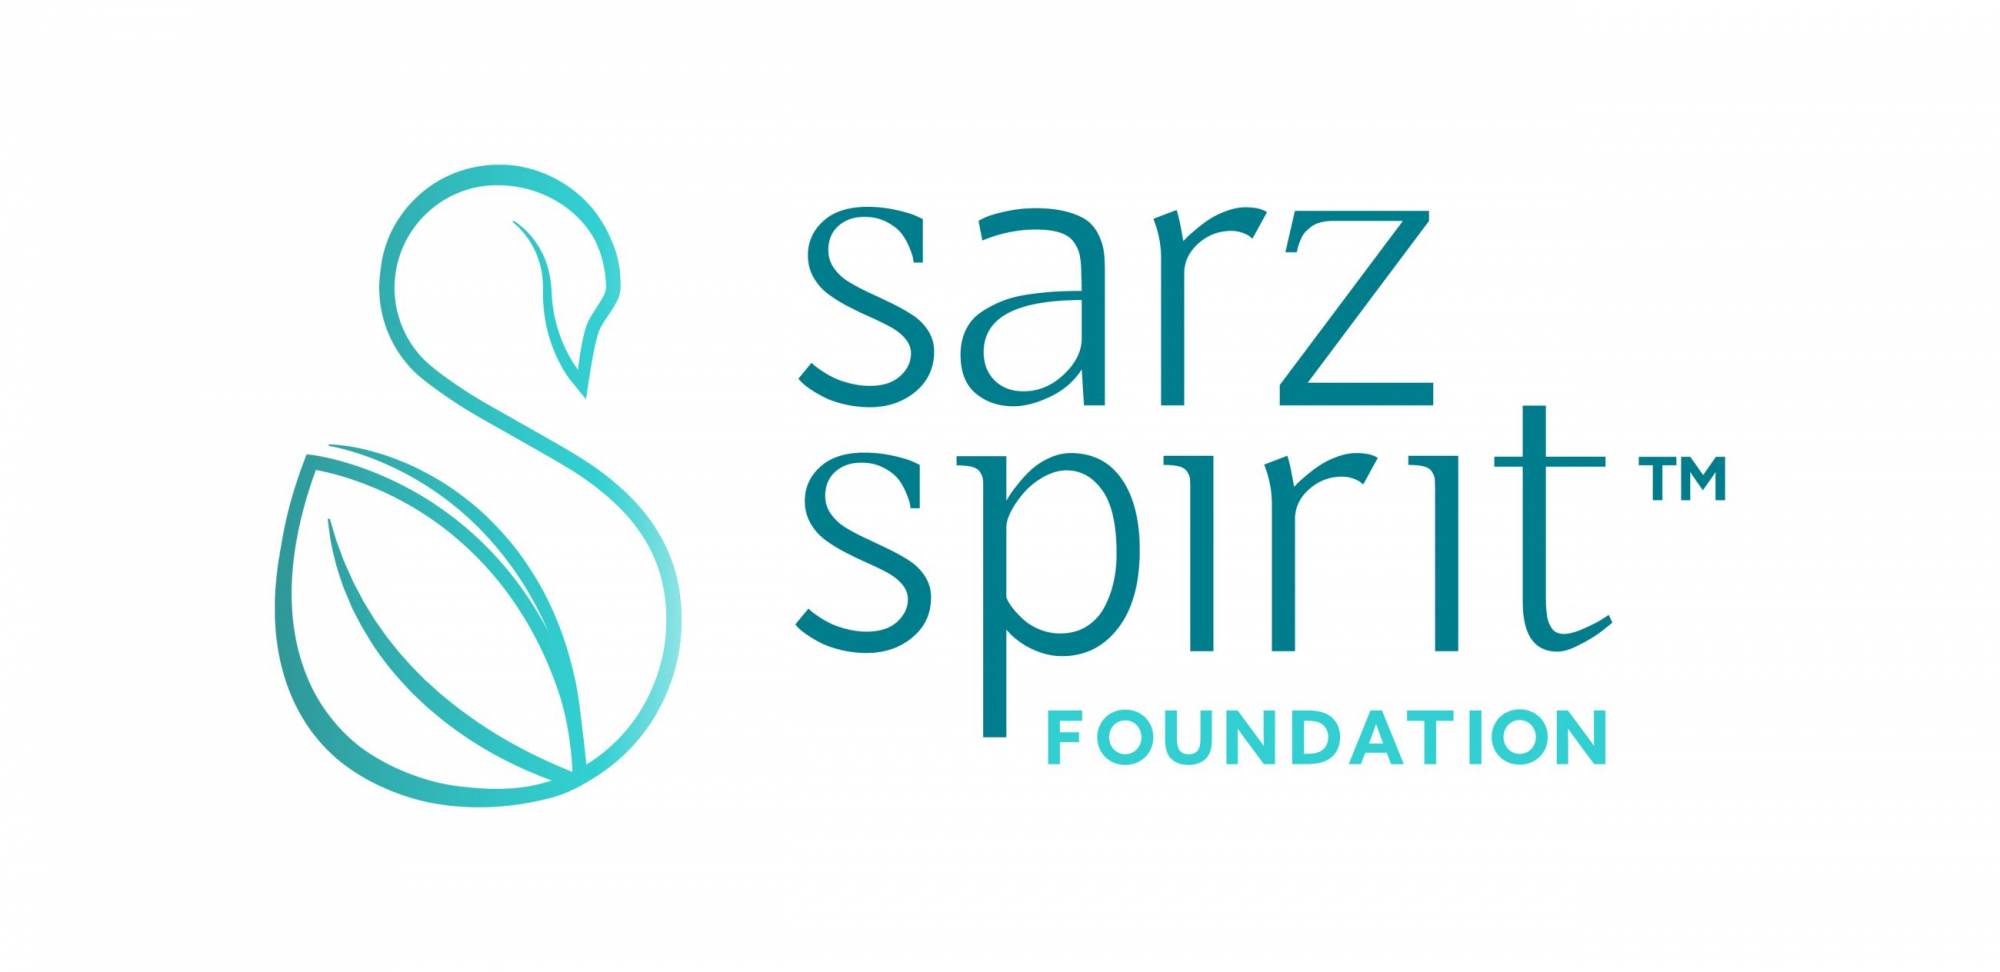 Brand identity for Sarz Sanctuary's not-for-profit foundation brand Sarz Spirit Foundation